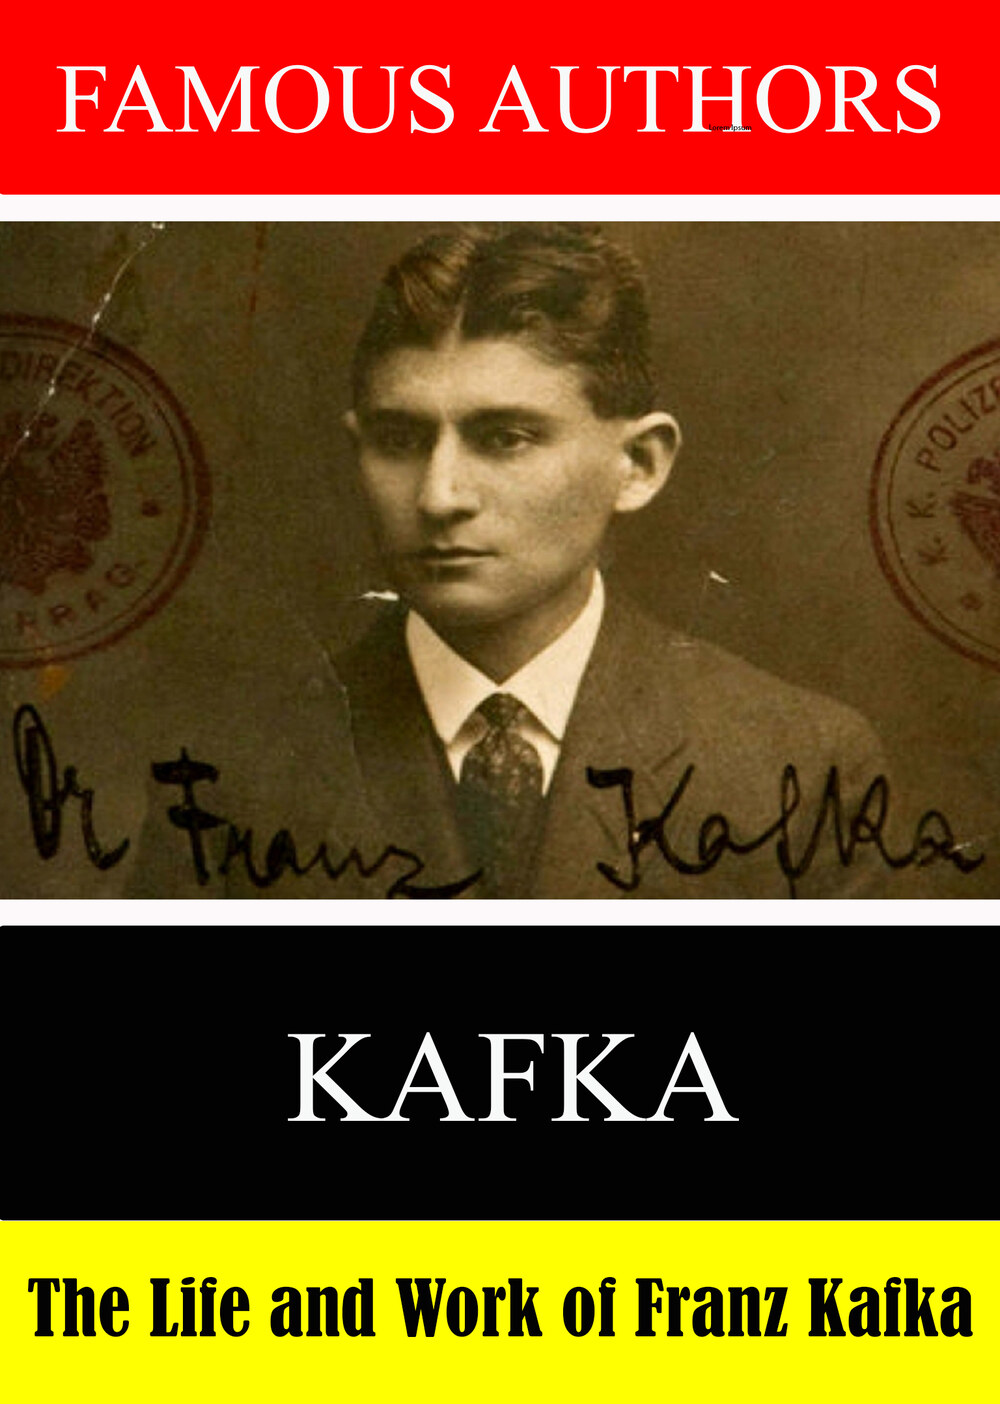 L7894 - Famous Authors: The Life and Work of Franz Kafka